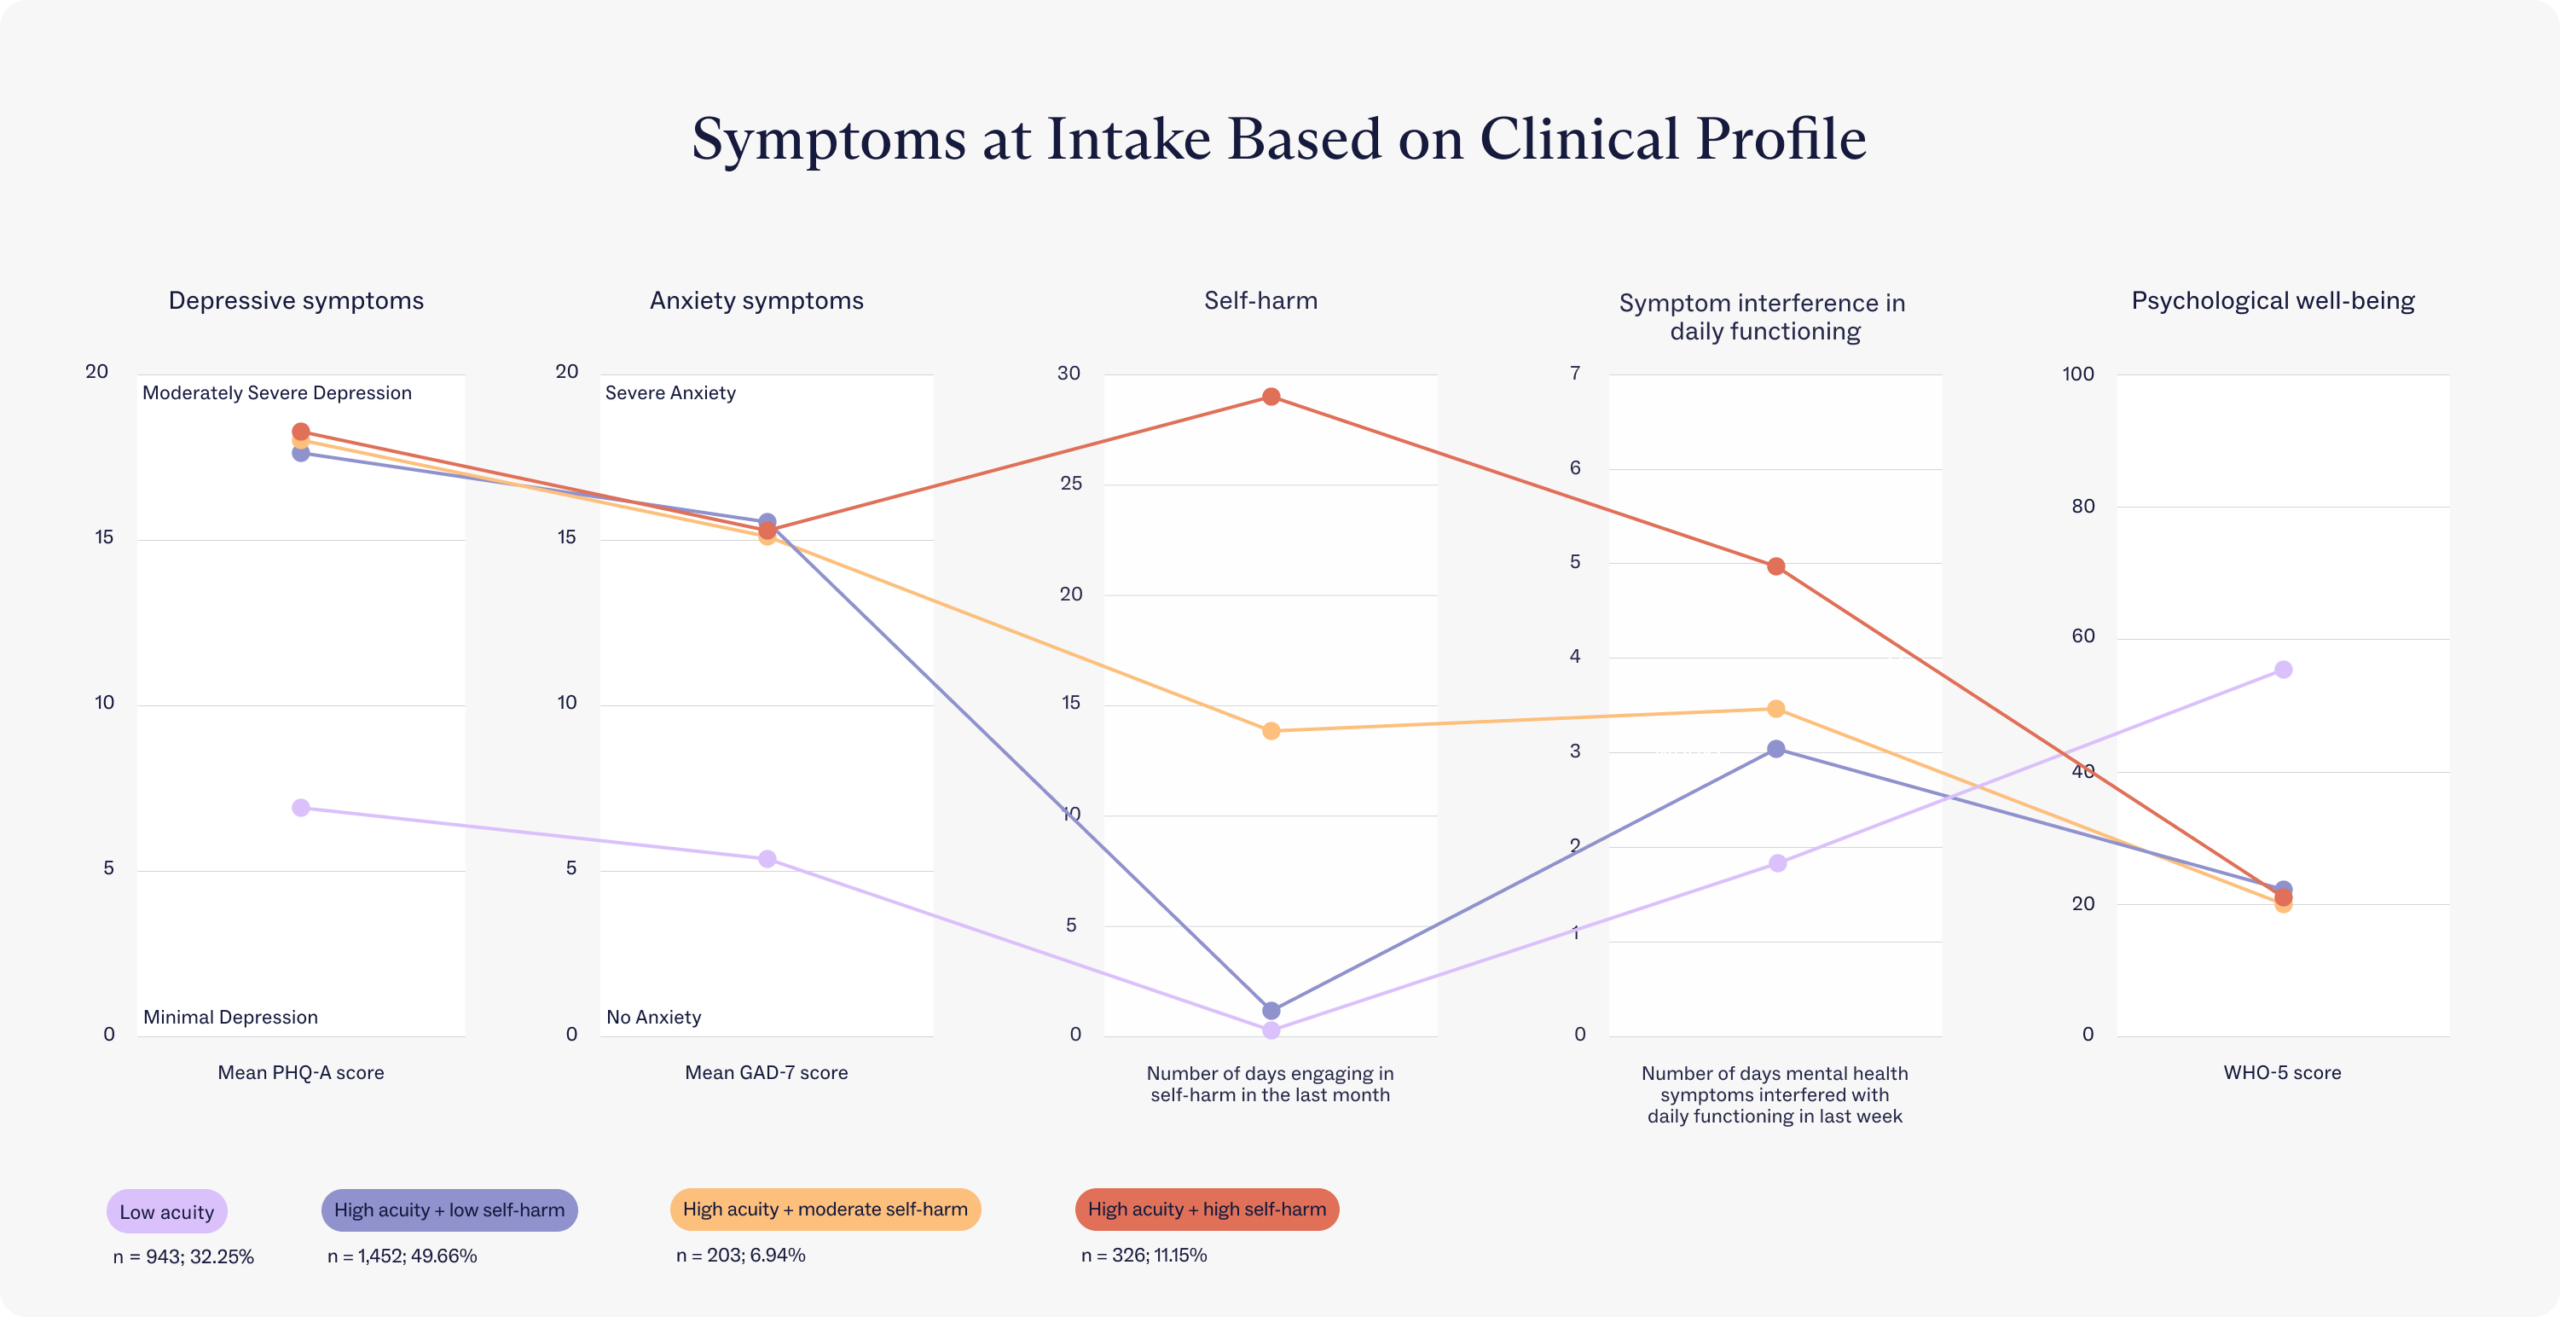 Symptoms at Intake Based on Clinical Profile